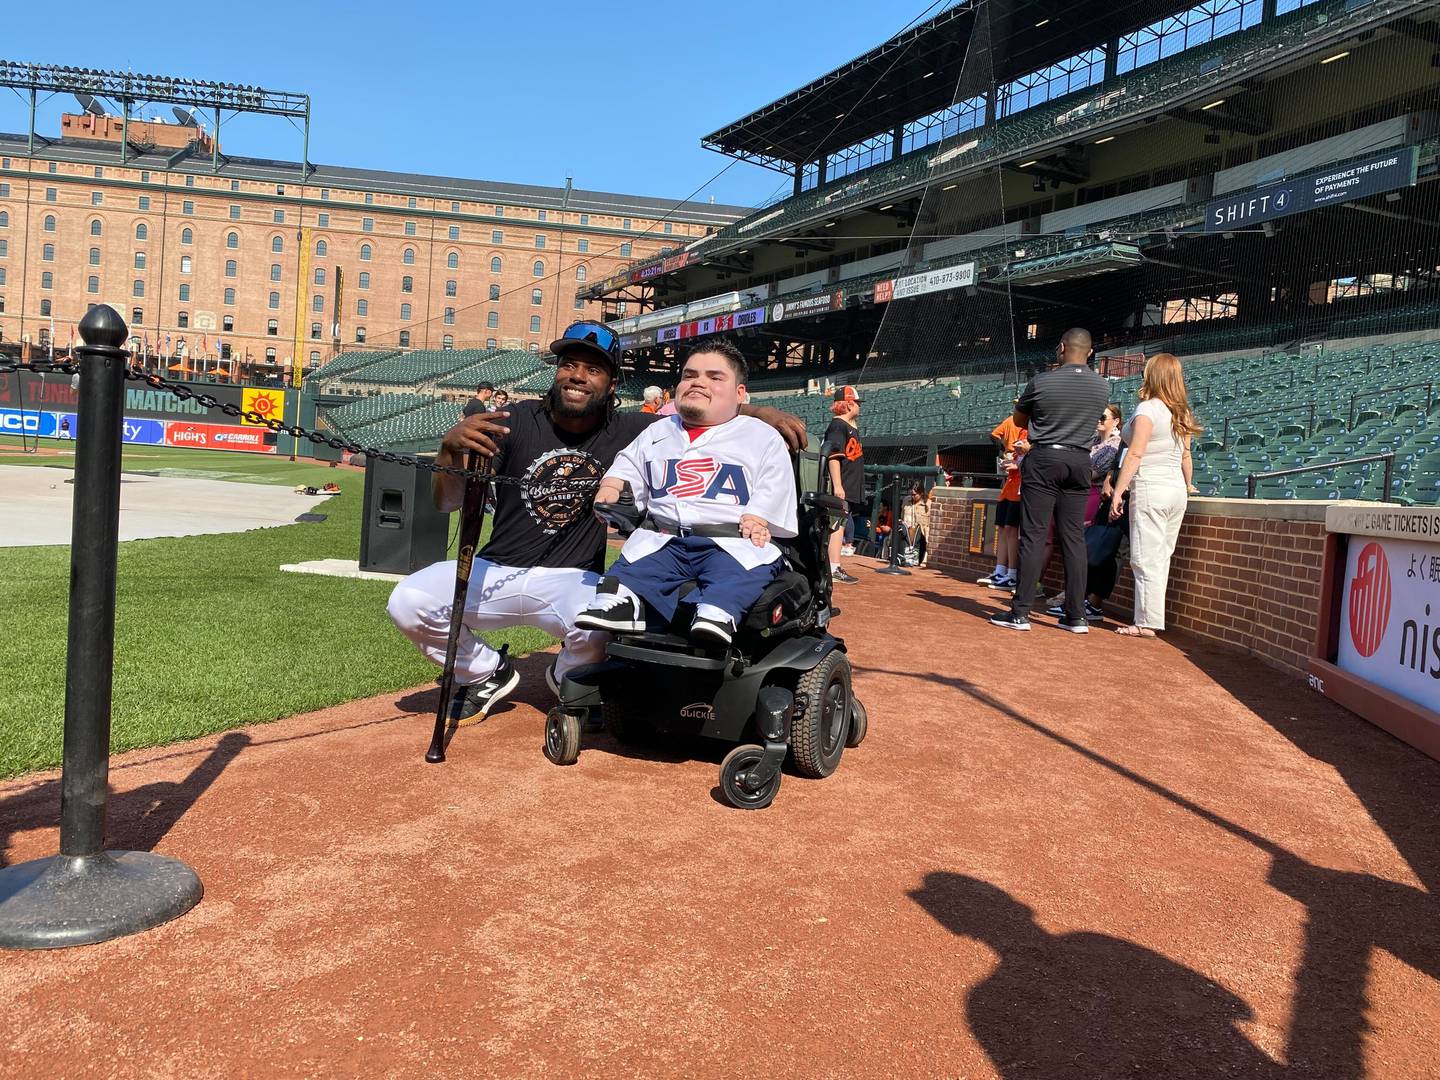 Orioles outfielder Cedric Mullins poses with A.J. Rodriguez, a Twitch streamer who made the now-famous "I can't escape him" video.